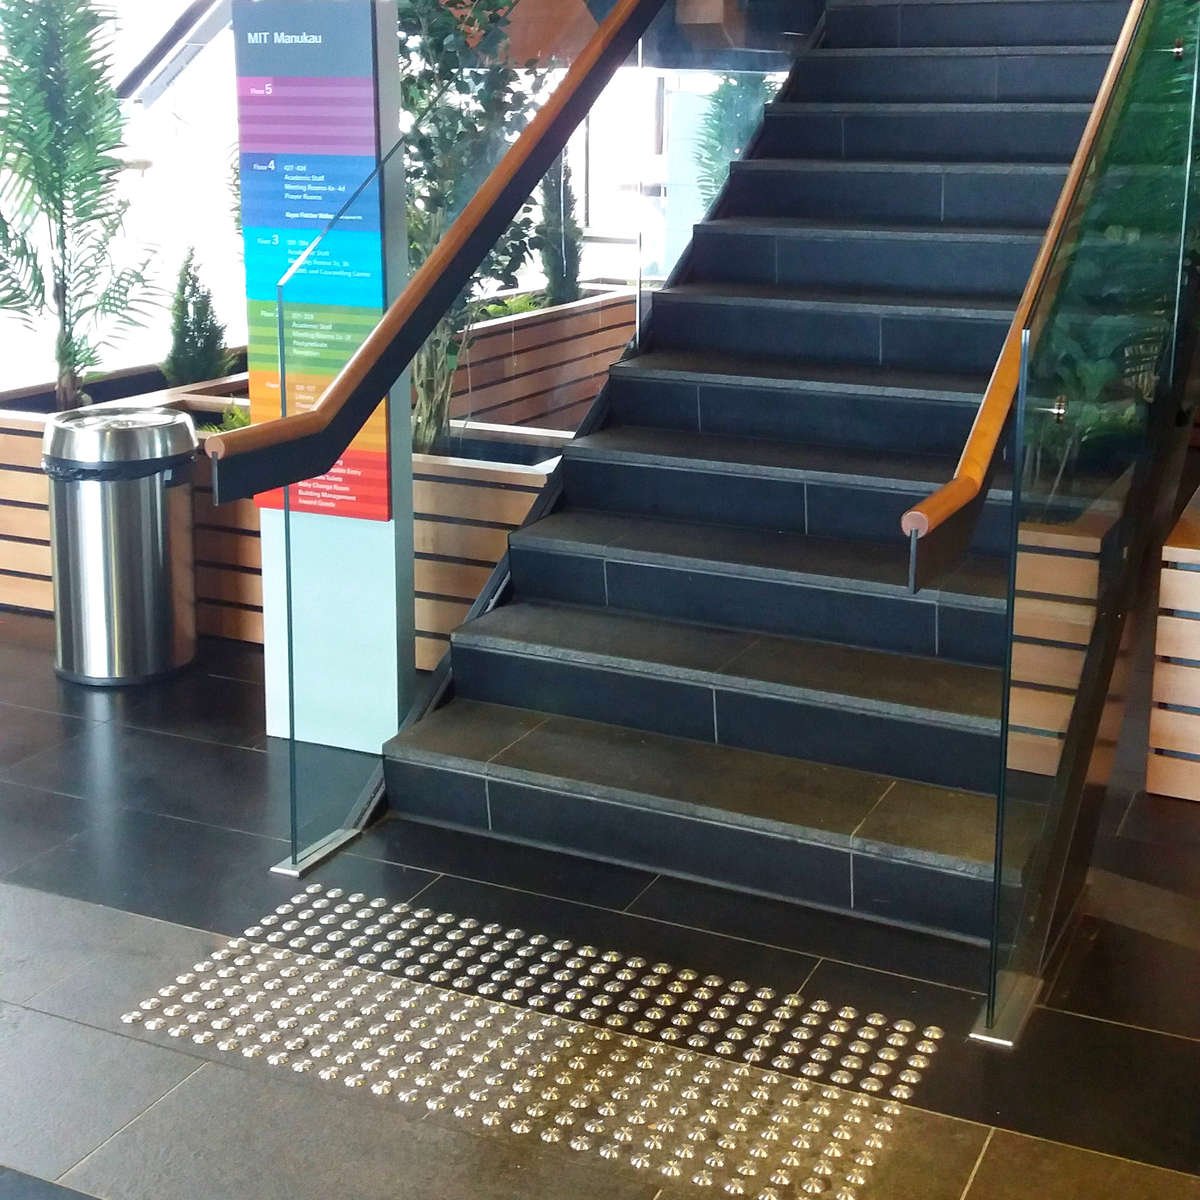 TacPro stainless steel tactile indicators installed to dark tiles at bottom of stairs